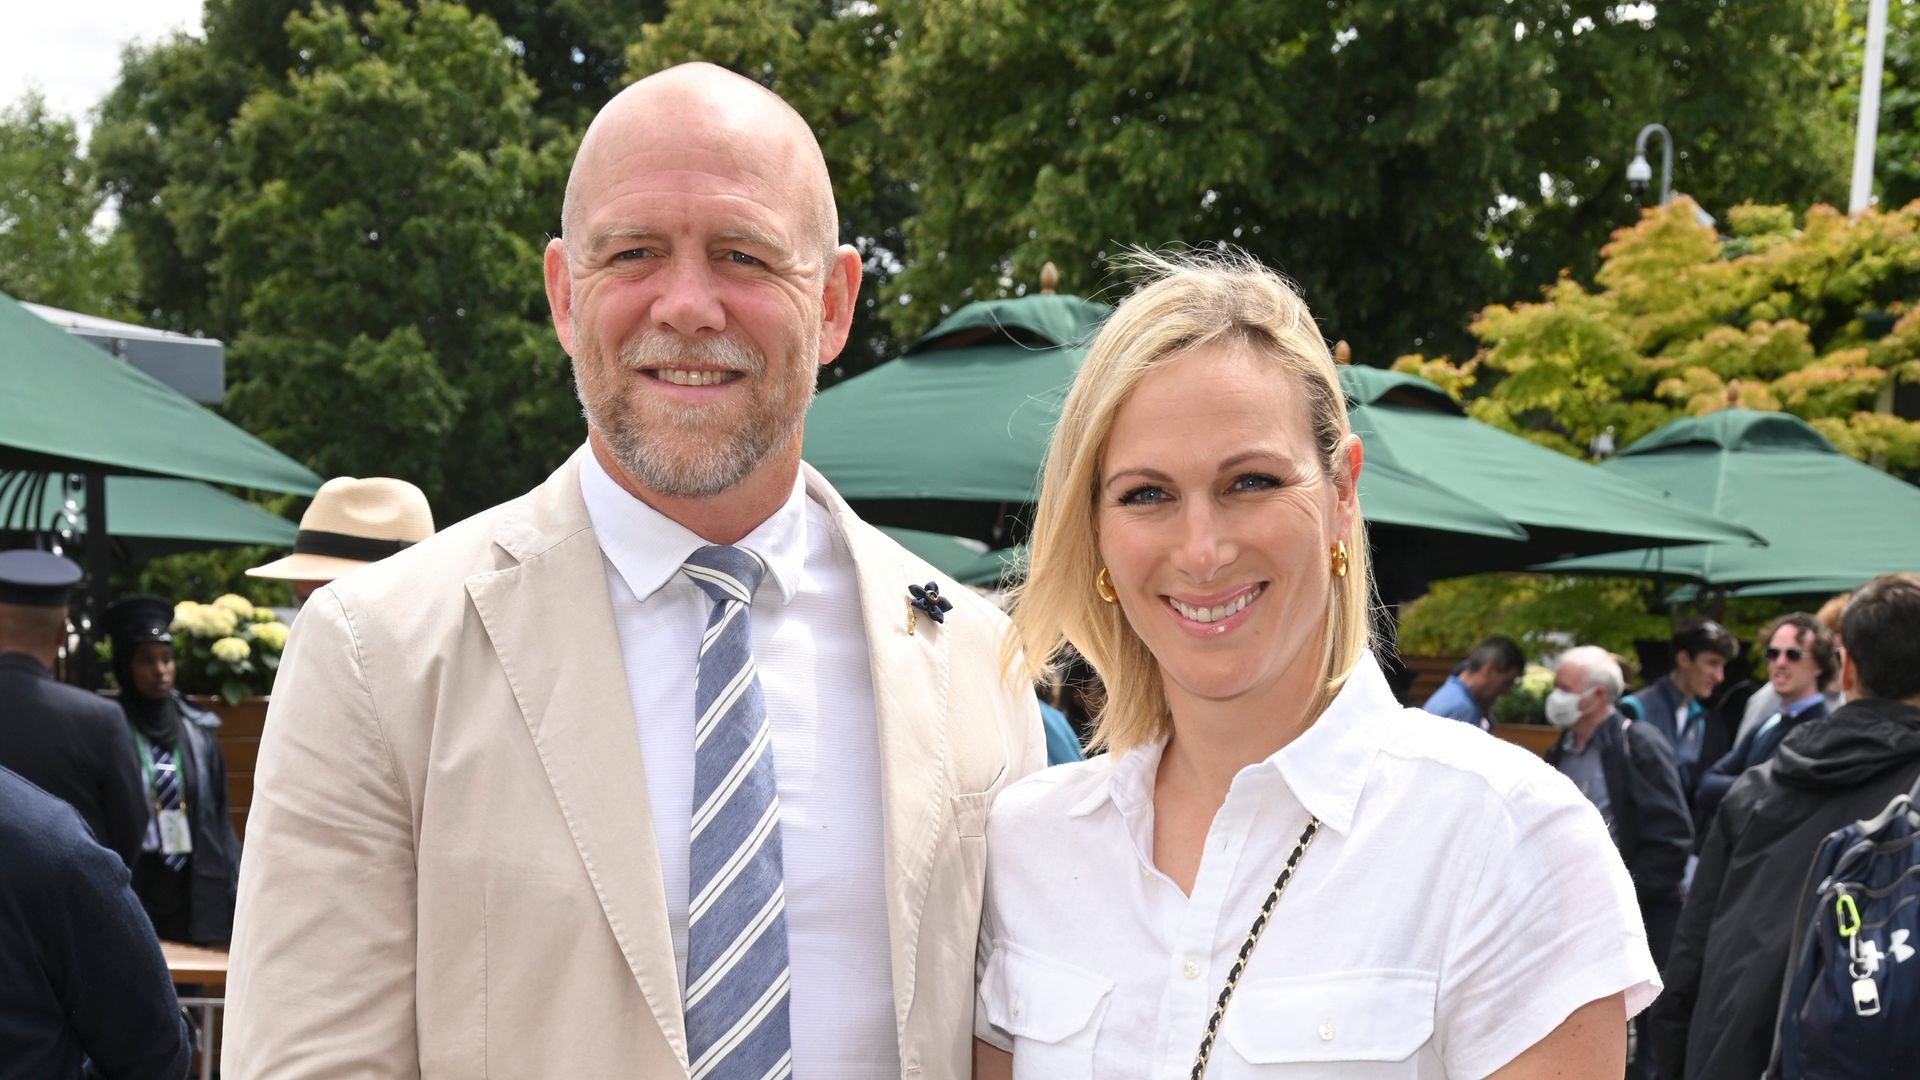 Mike and Zara pose for a photo at Wimbledon 2022